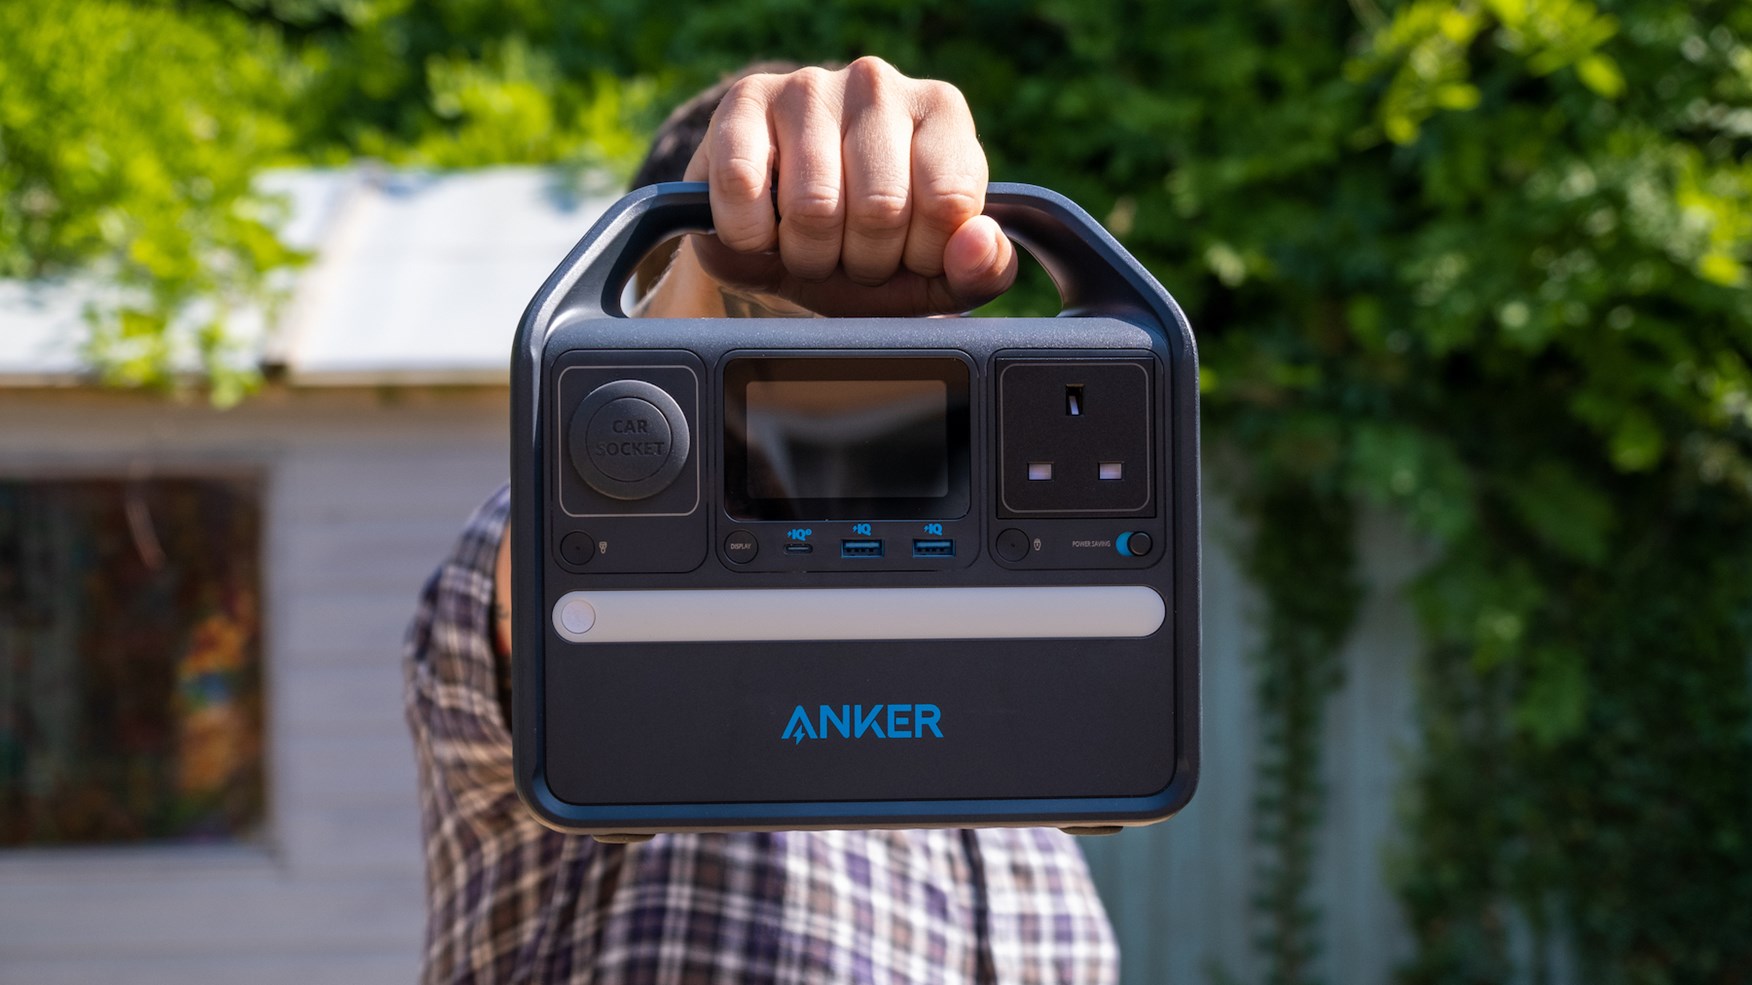 Anker 521 PowerHouse Power Station review